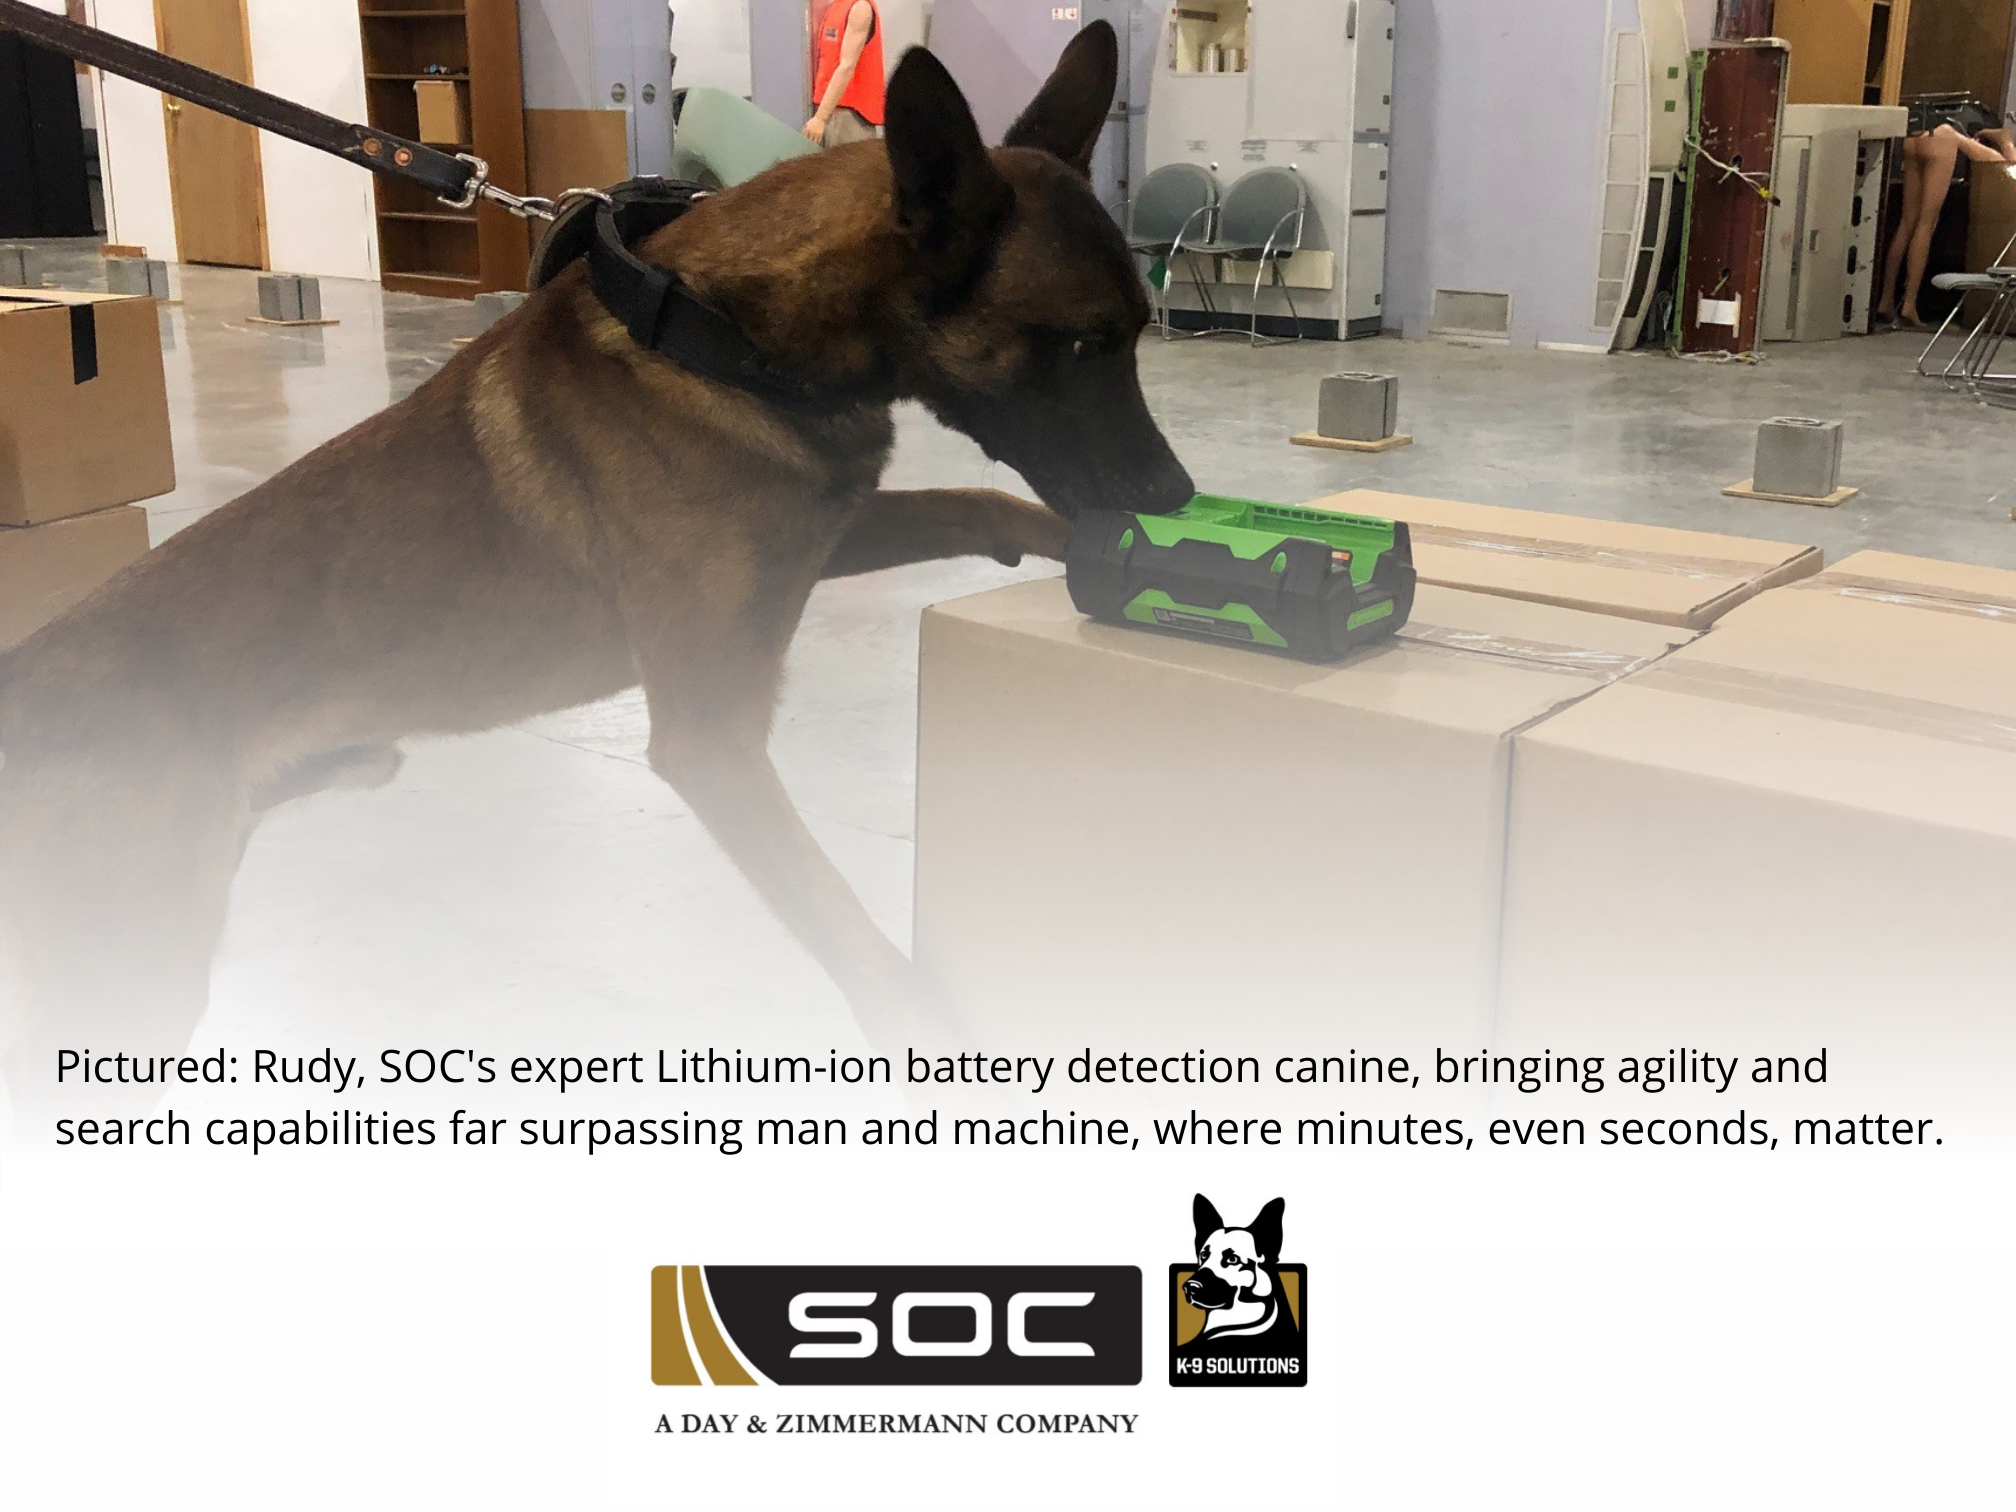 Pictured Rudy, SOCs expert Lithium-ion battery detection canine, bringing agility and search capabilities far surpassing man and machine, where minutes, even seconds, matter.